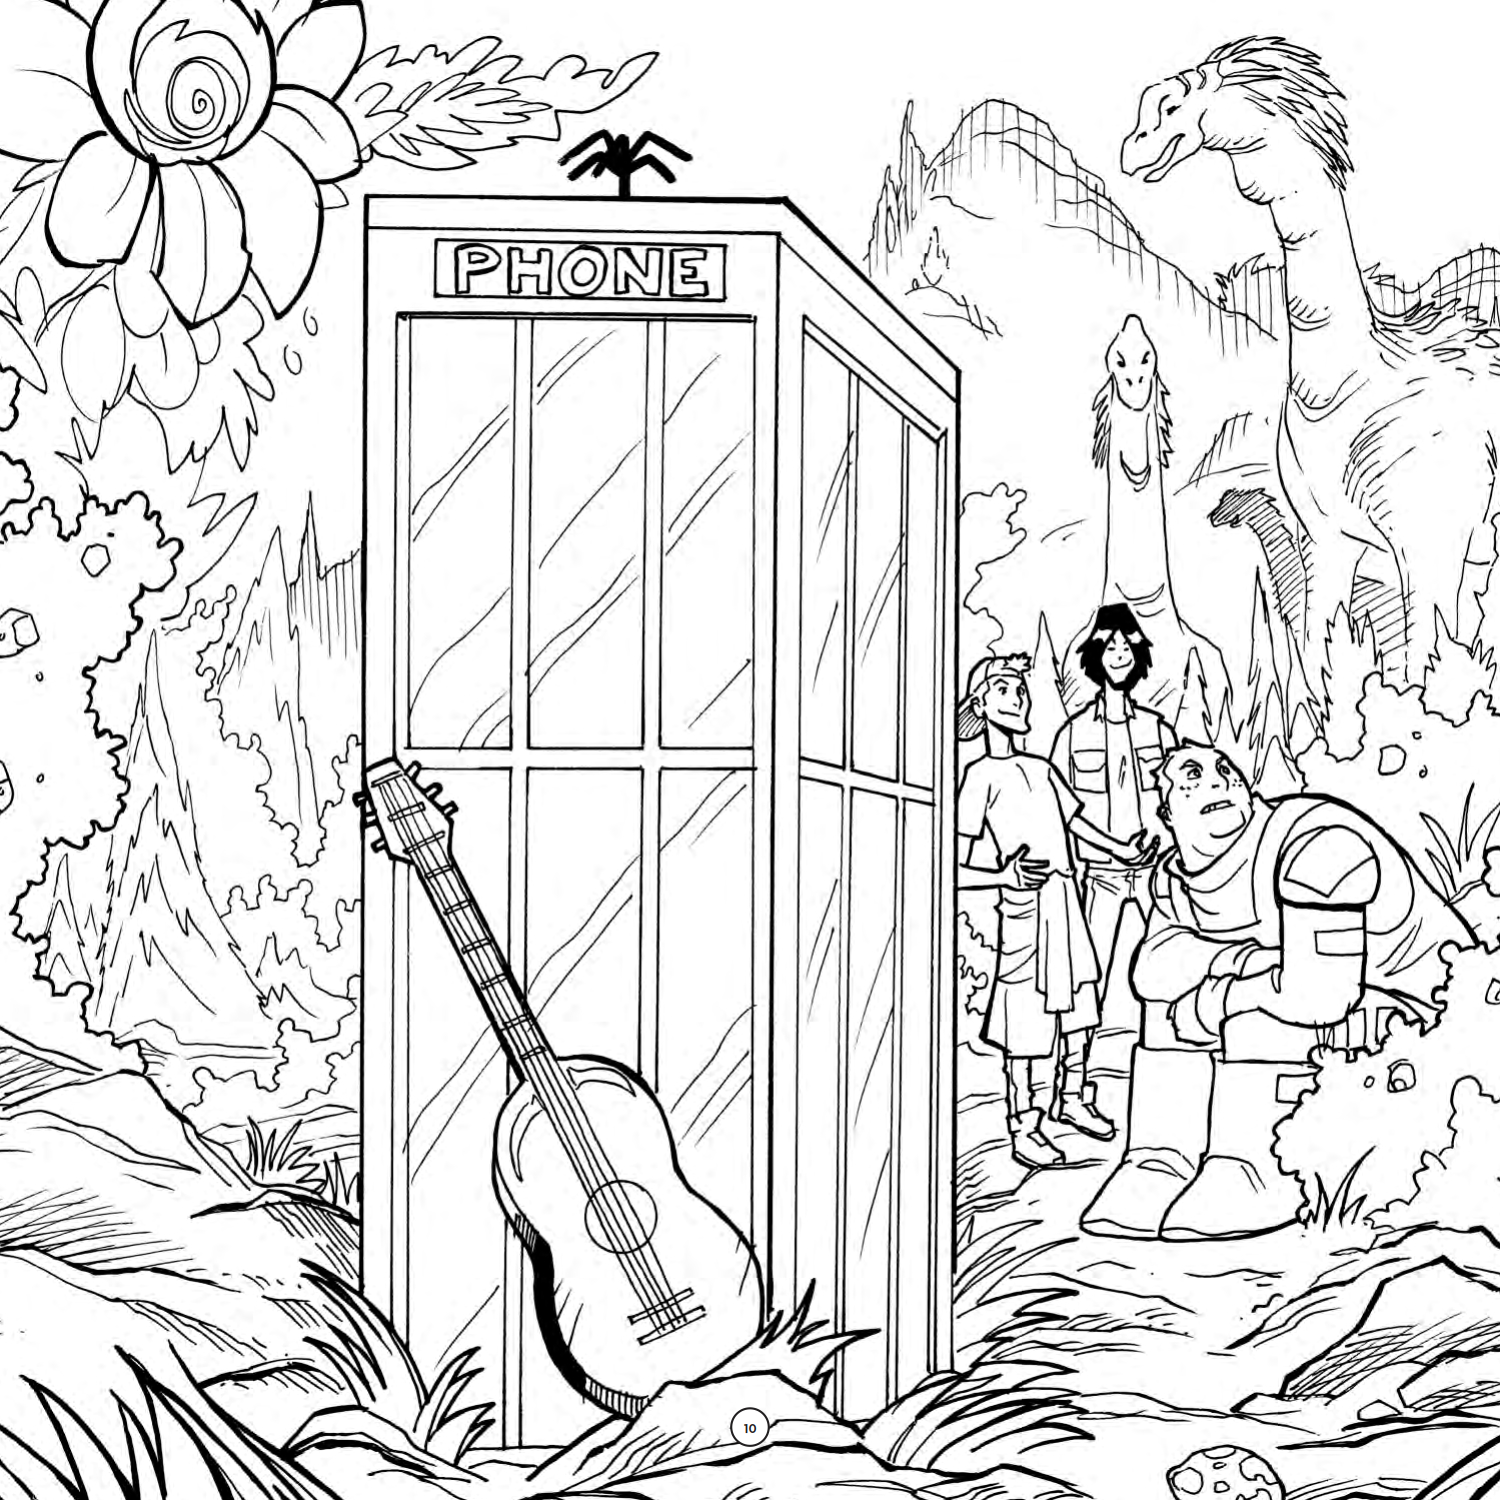 Bill&Ted’s Most Excellent Adult Coloring SC_PRESS_12